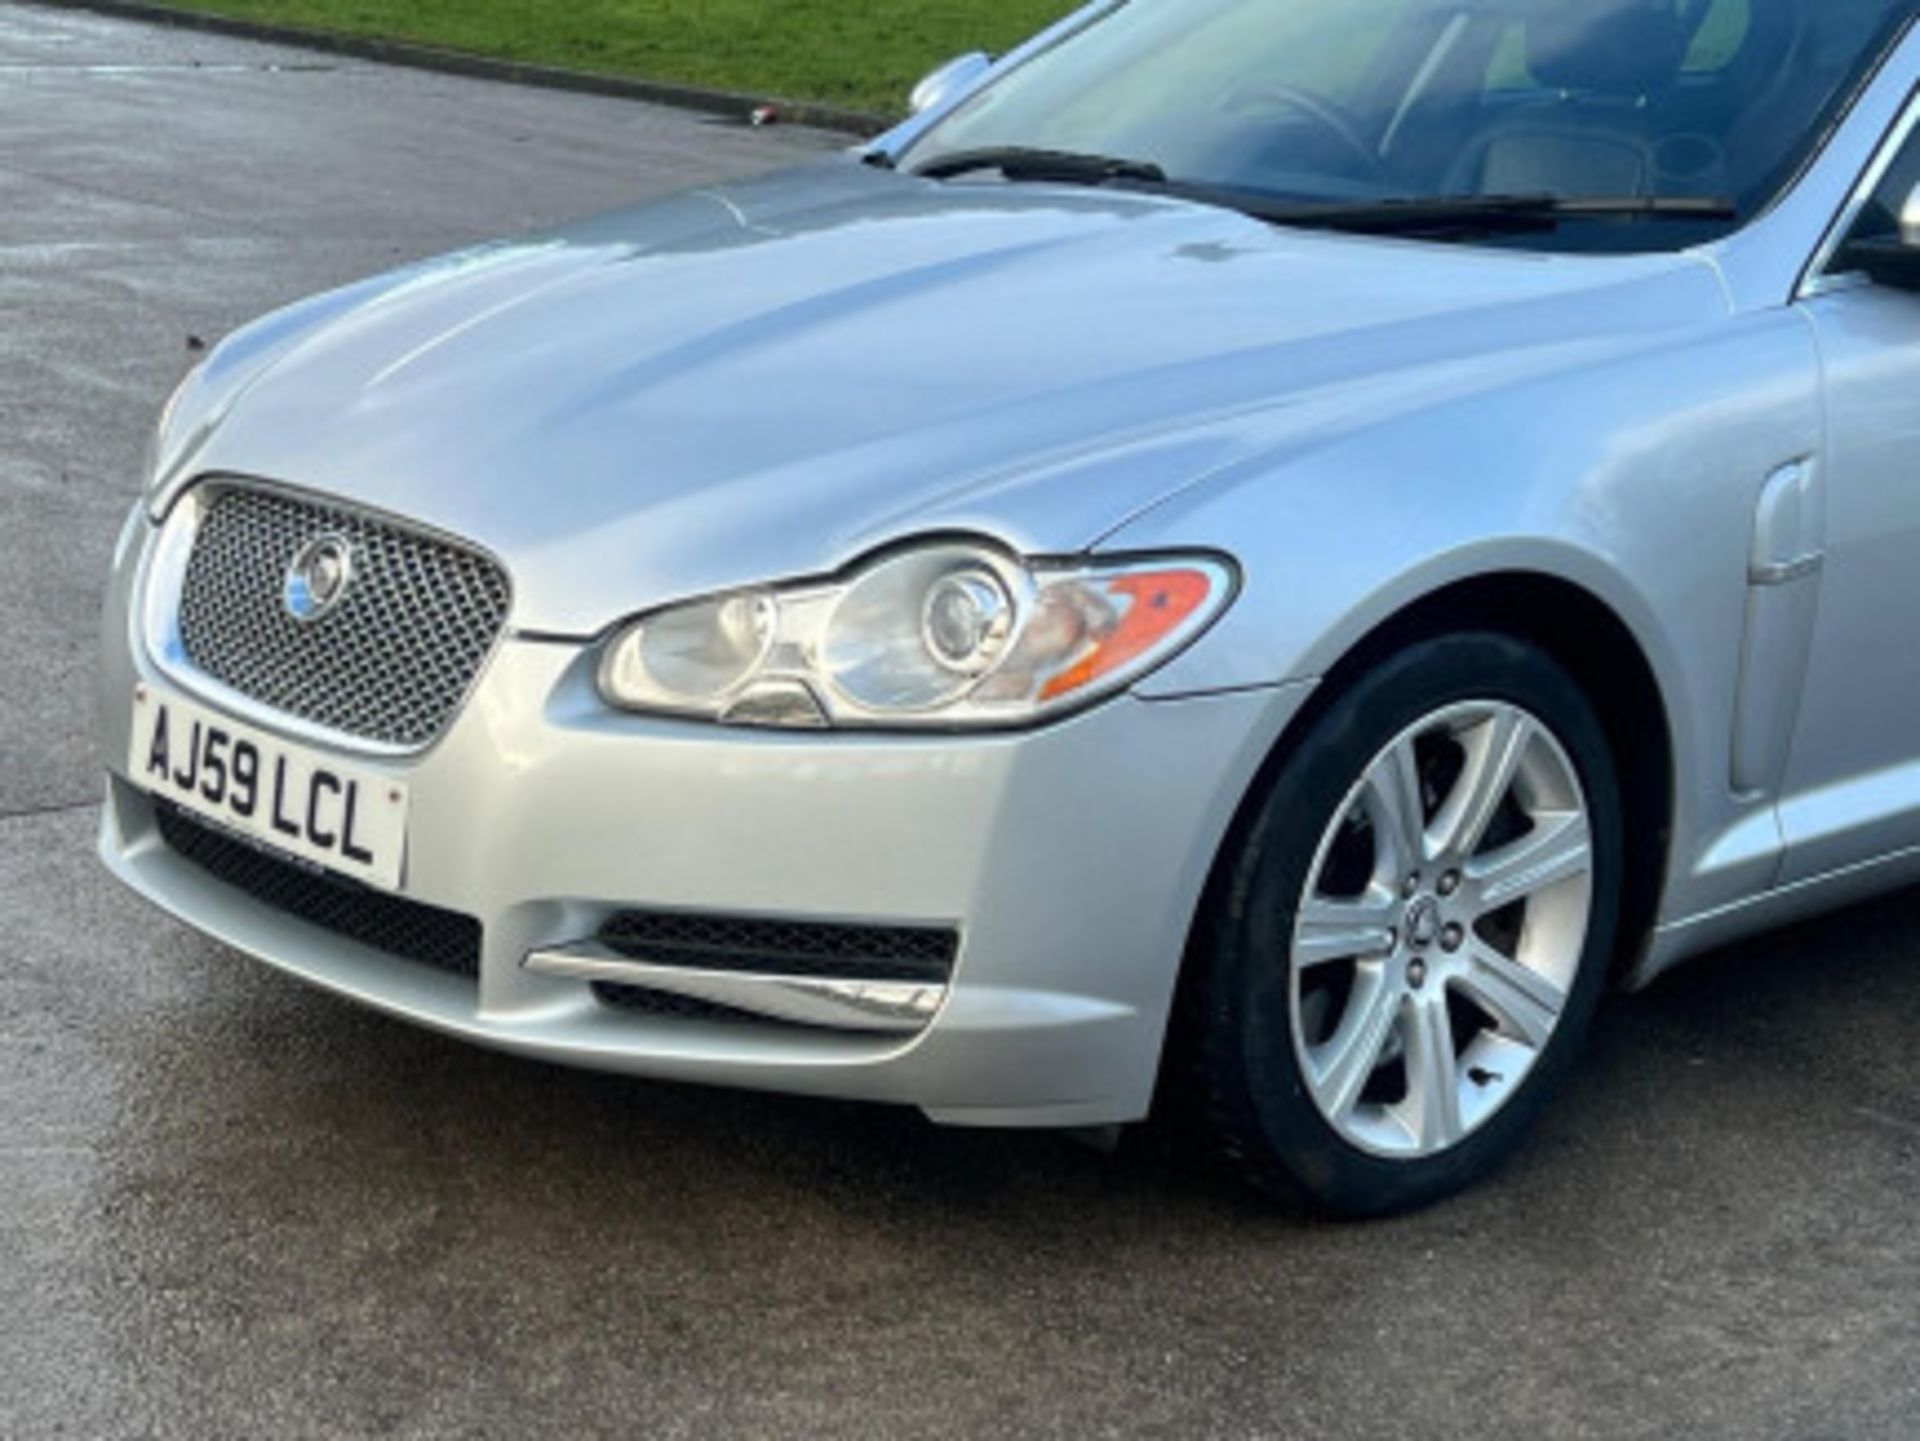 LUXURIOUS JAGUAR XF 3.0D V6 LUXURY 4DR AUTOMATIC SALOON >>--NO VAT ON HAMMER--<< - Image 29 of 80